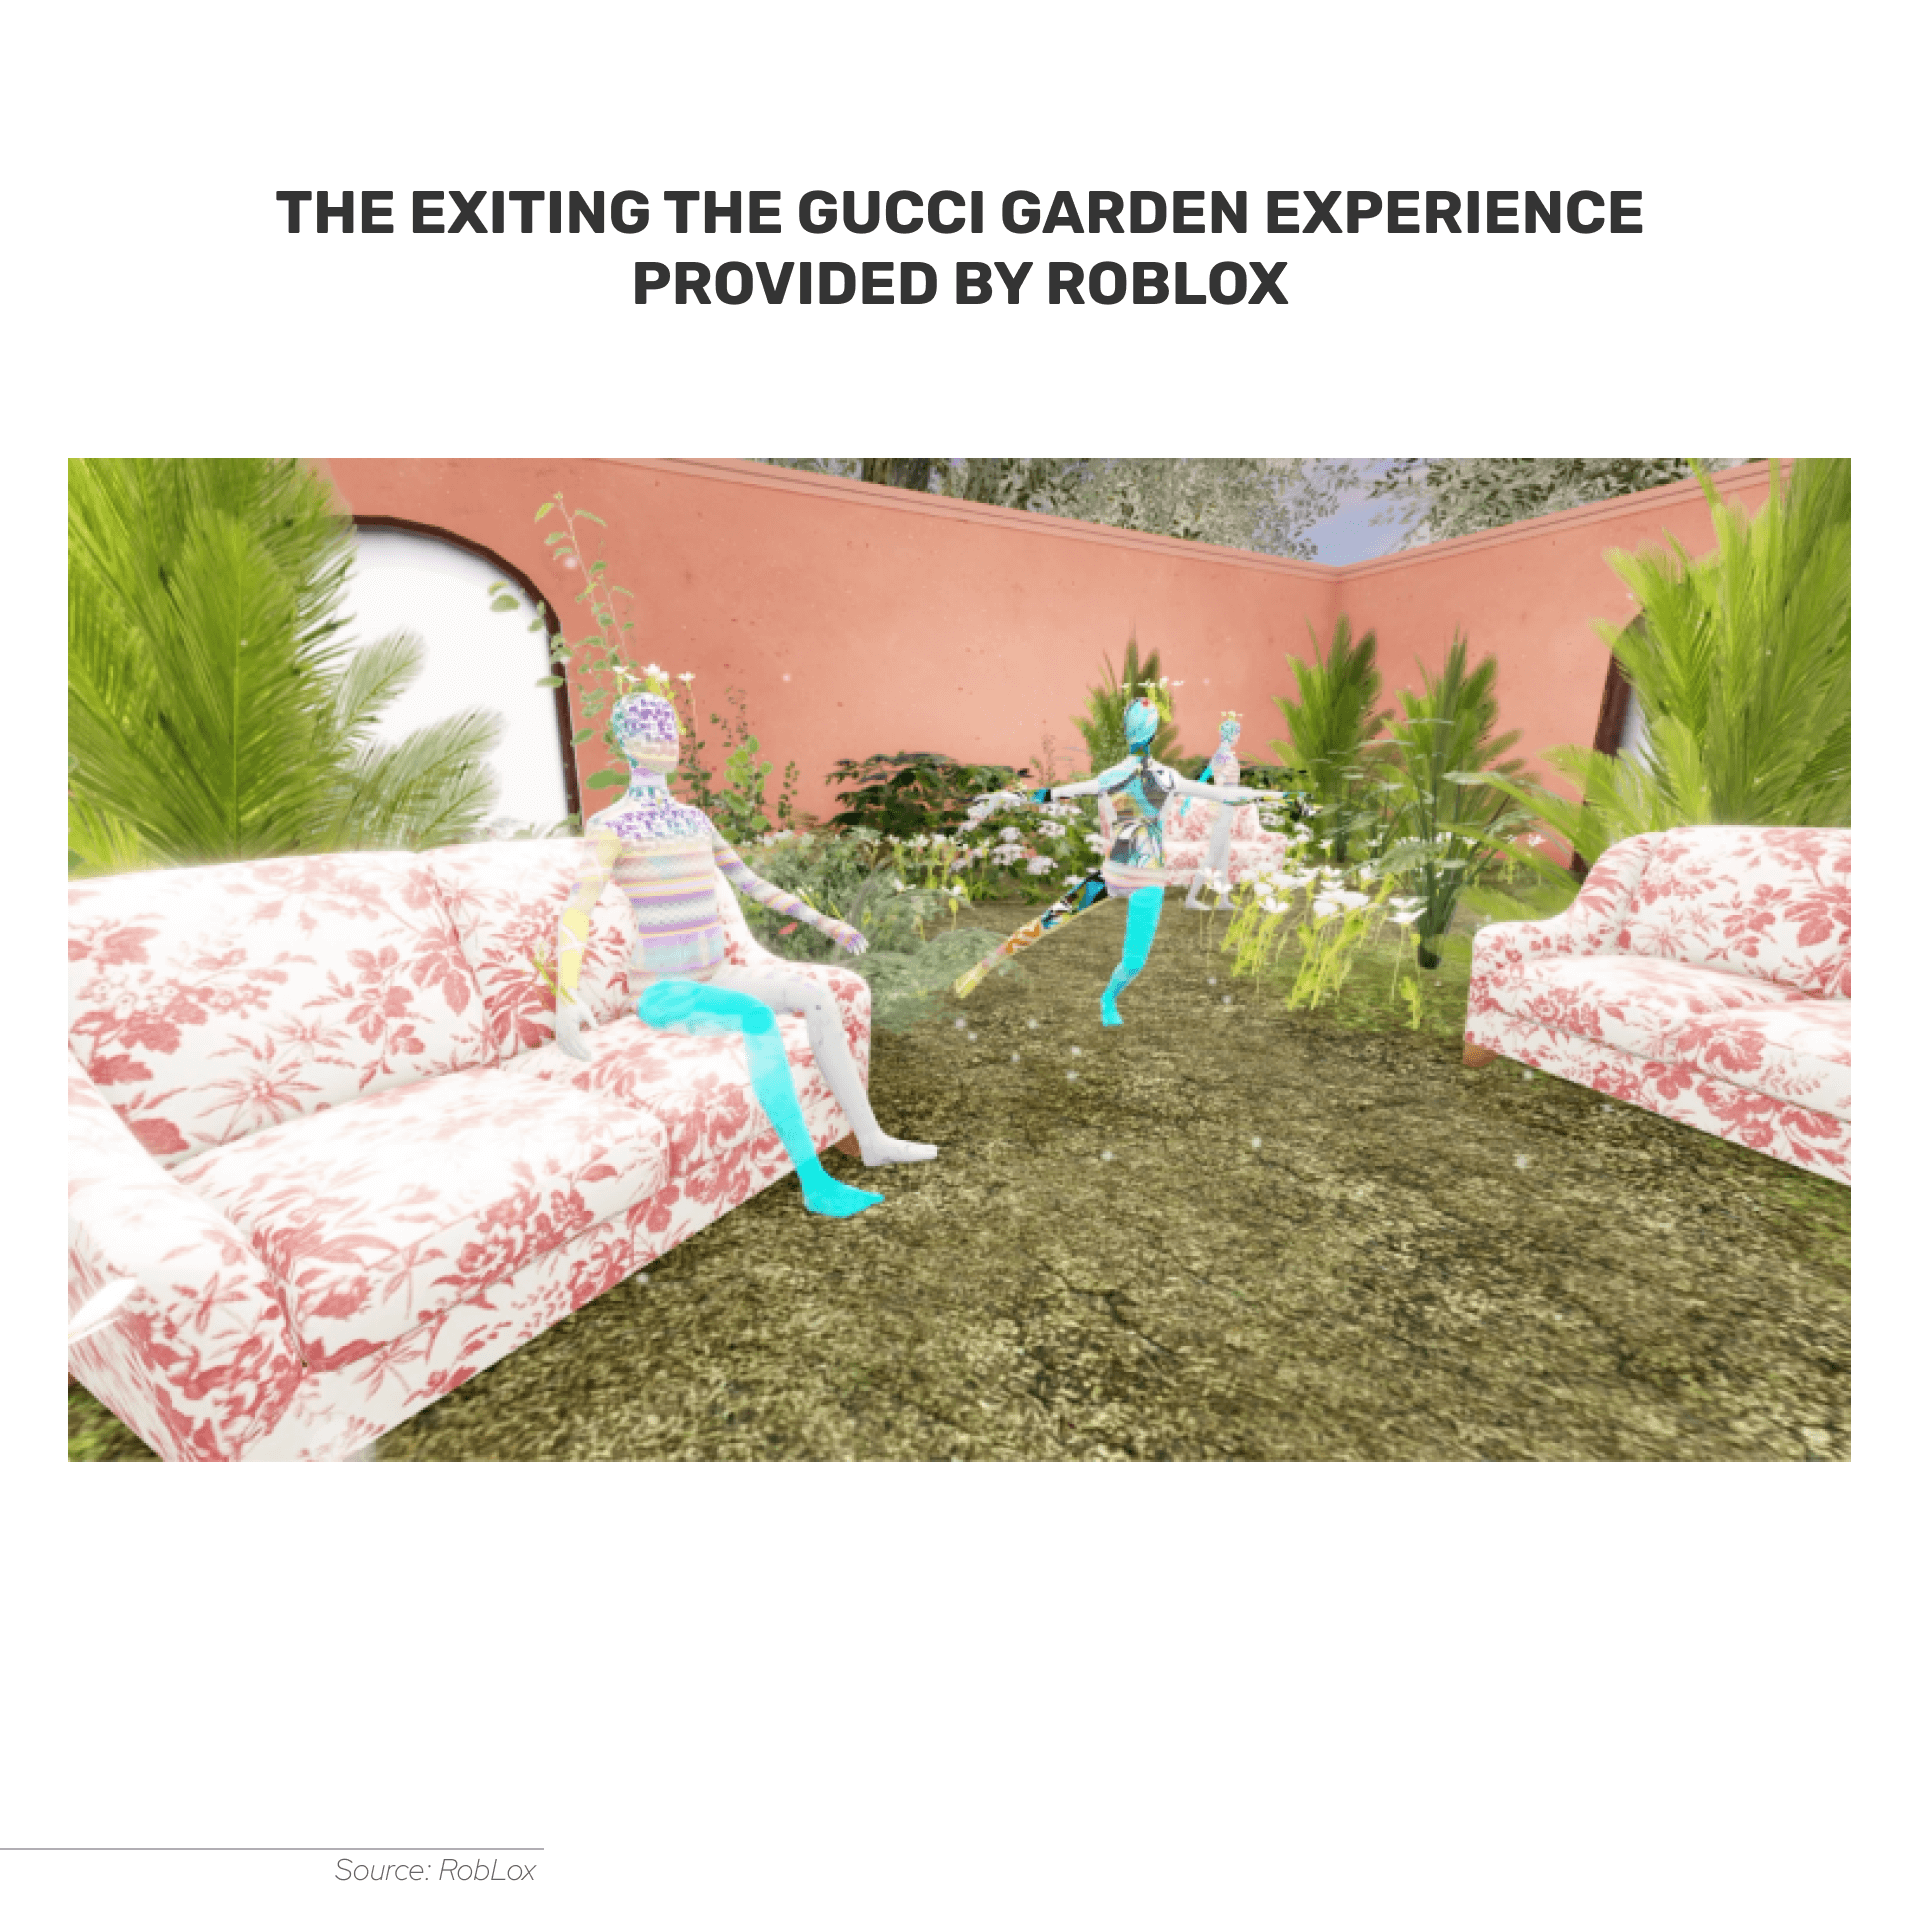 The partnership of Gucci with Roblox resulted in a platform delivering interactive virtual experience.